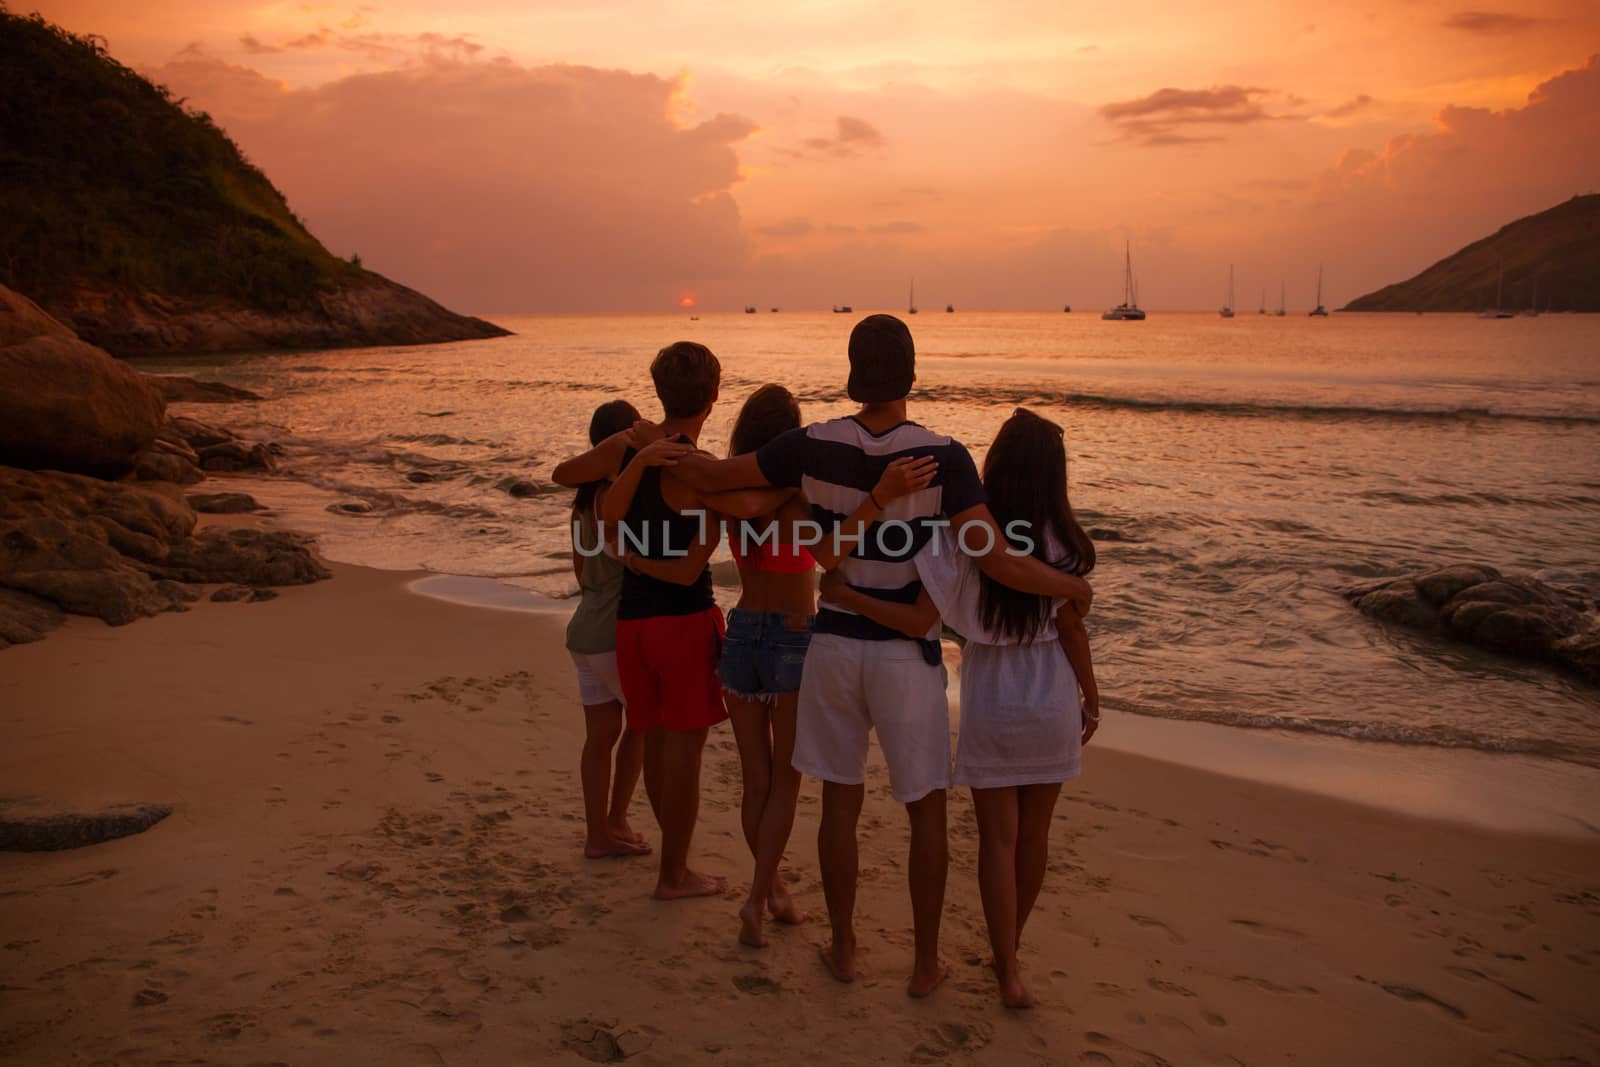 Friends on beach at sunset by ALotOfPeople